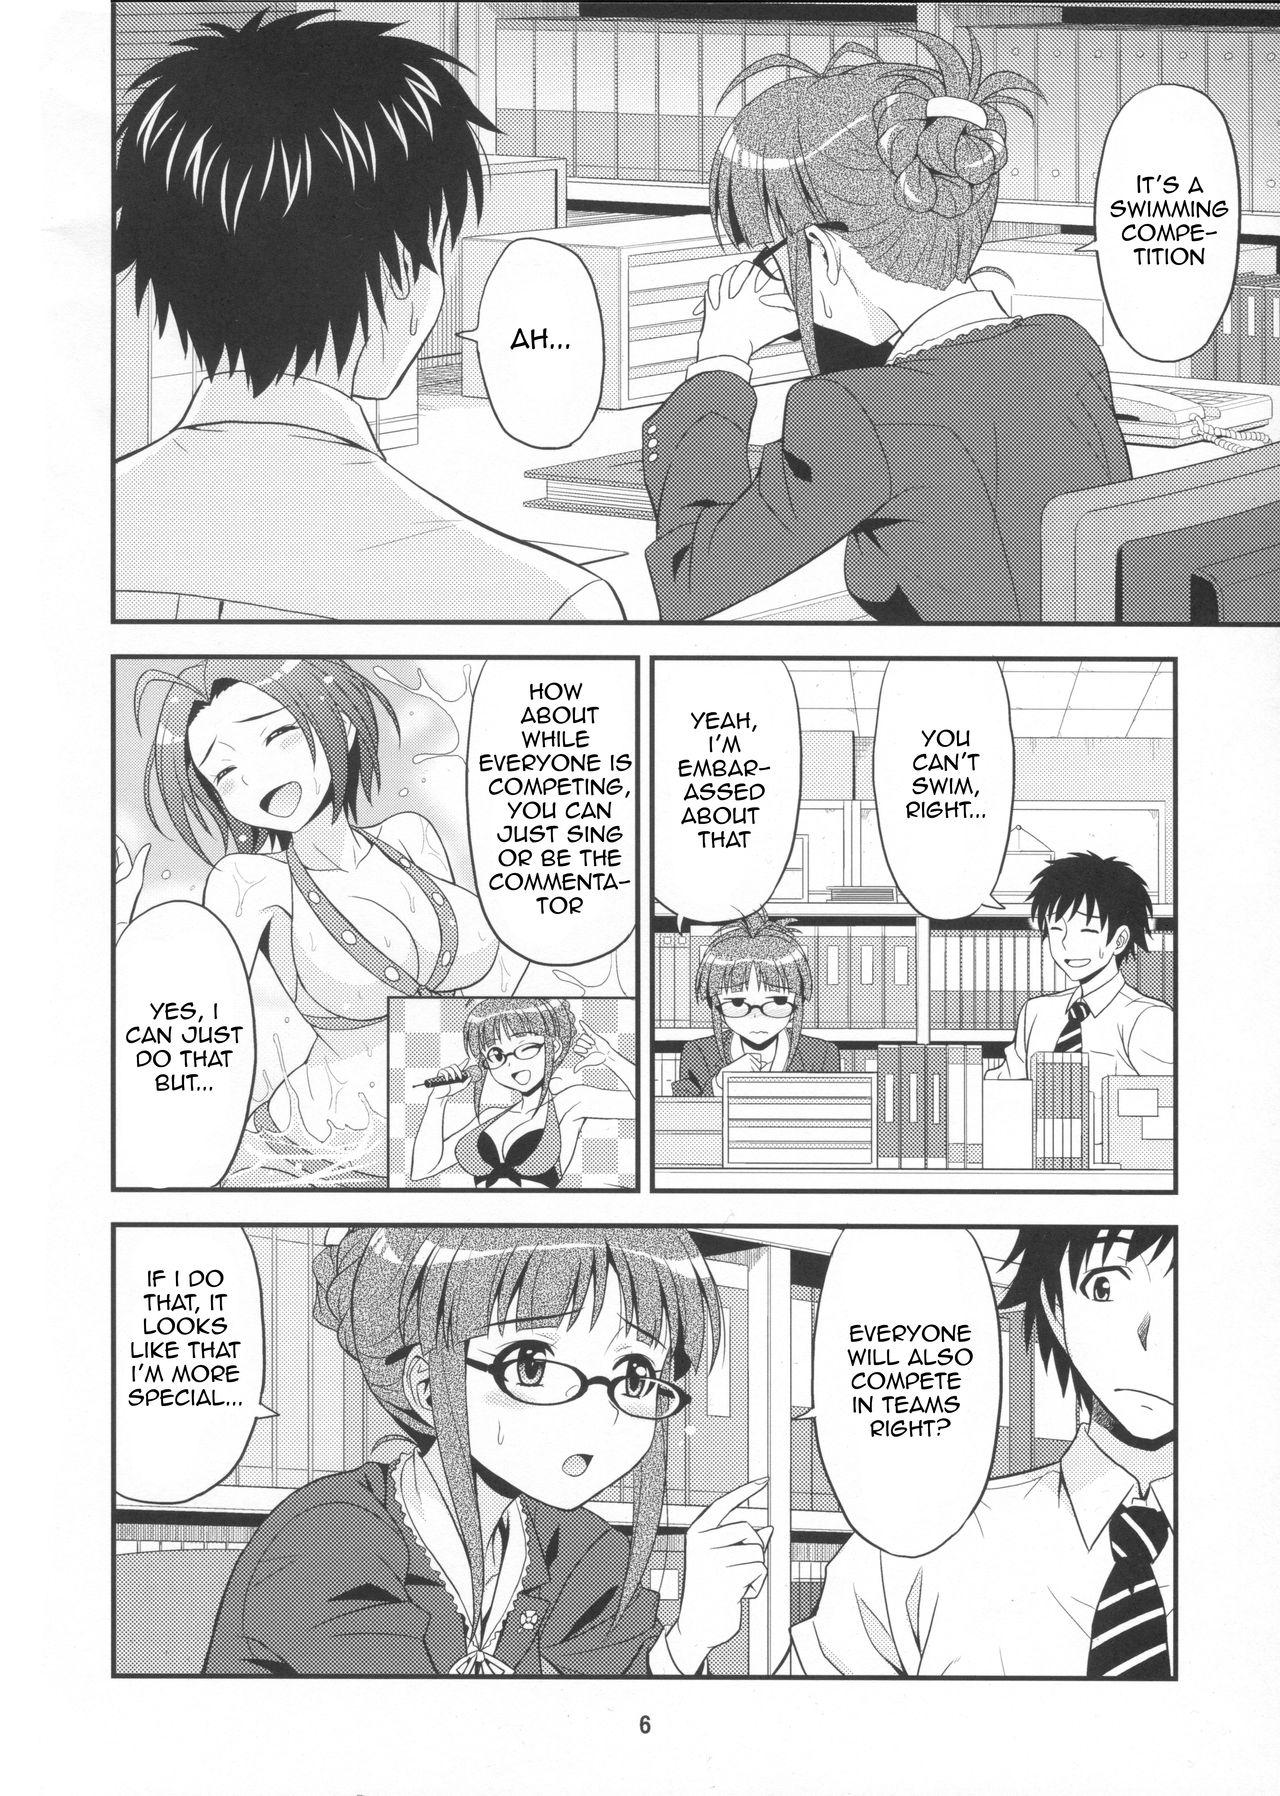 Ex Girlfriends Training for You! - The idolmaster Full Movie - Page 6